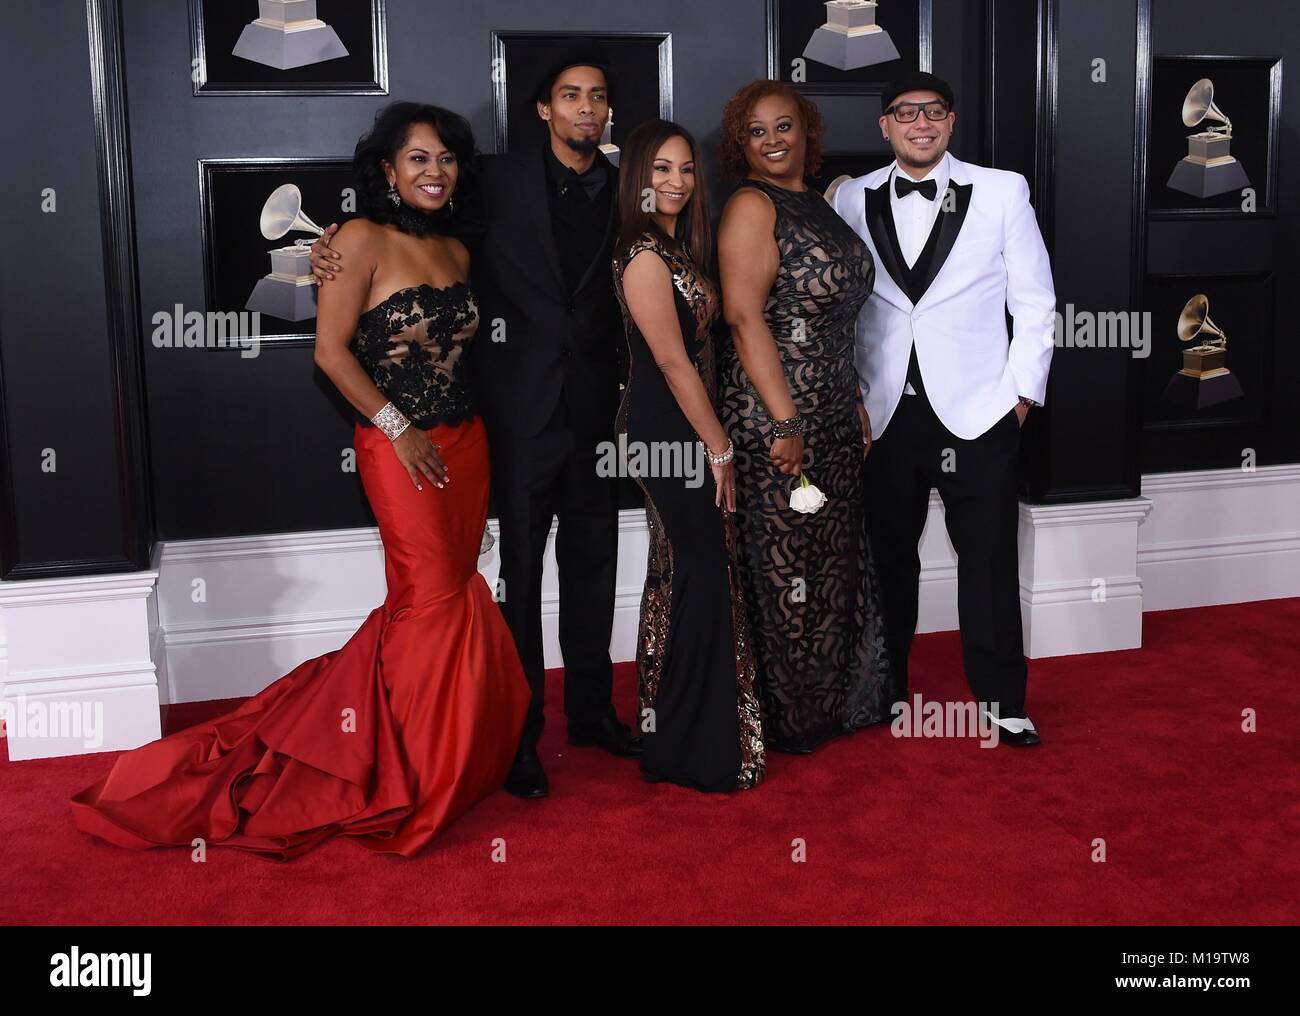 New York, NY, USA. 28th Jan, 2018. James Brown Family at arrivals for 60th Anniversary Grammy Awards - Arrivals 2, Madison Square Garden, New York, NY January 28, 2018. Credit: Max Parker/Everett Collection/Alamy Live News Stock Photo